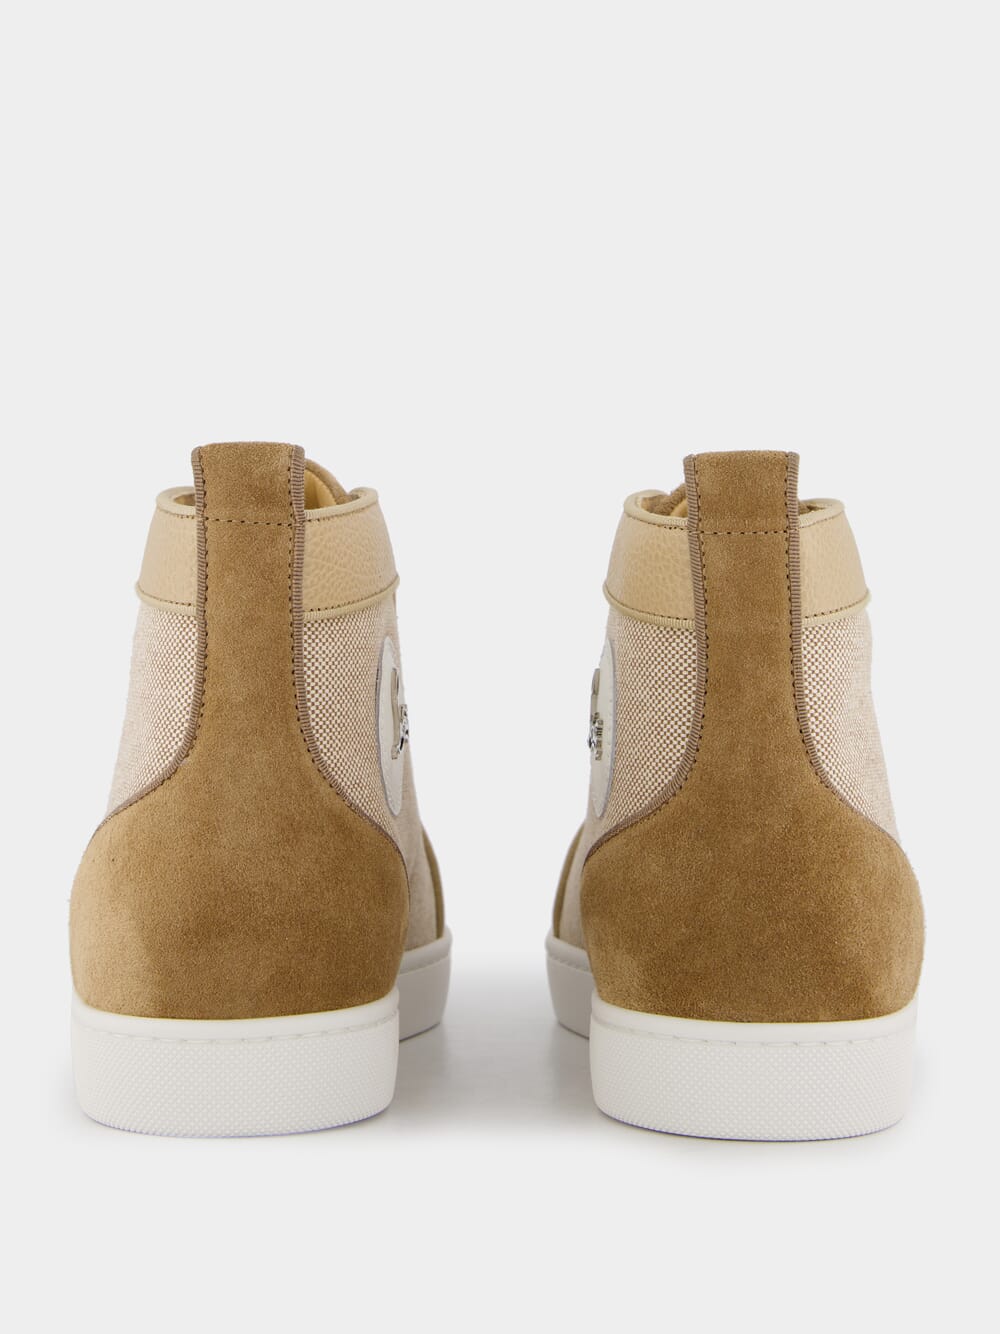 Christian LouboutinLinen Blend Louis Ornato High-Top Sneakers at Fashion Clinic